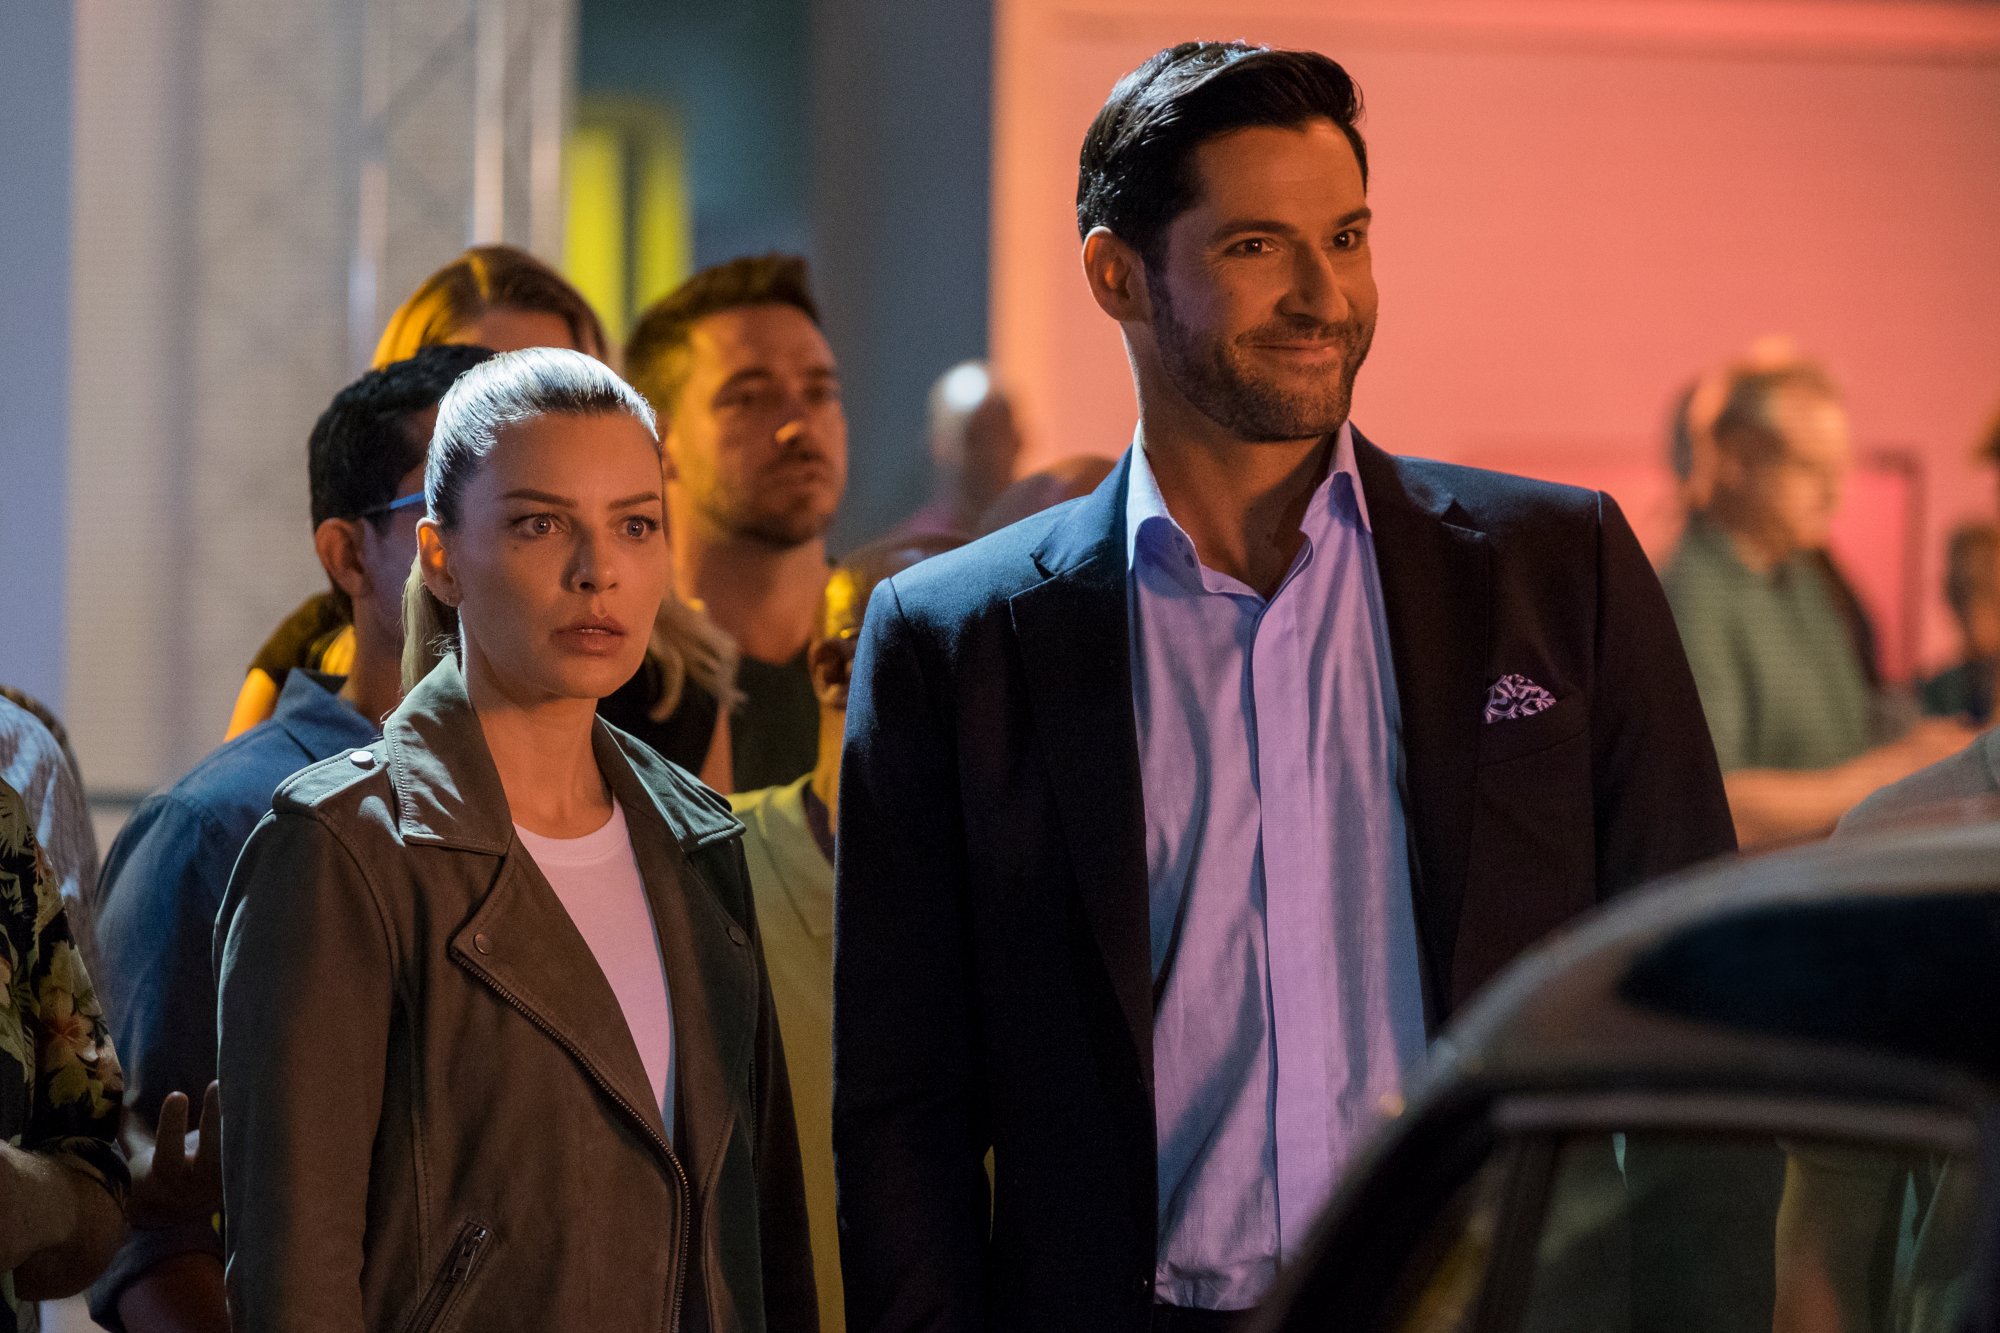 Lauren German and Tom Ellis as Chloe Decker and Lucifer Morningstar in 'Lucifer' Season 4. These 'Lucifer' episodes focus more on their relationship. Chloe looks shocked in the photo, and Lucifer looks happy about something.